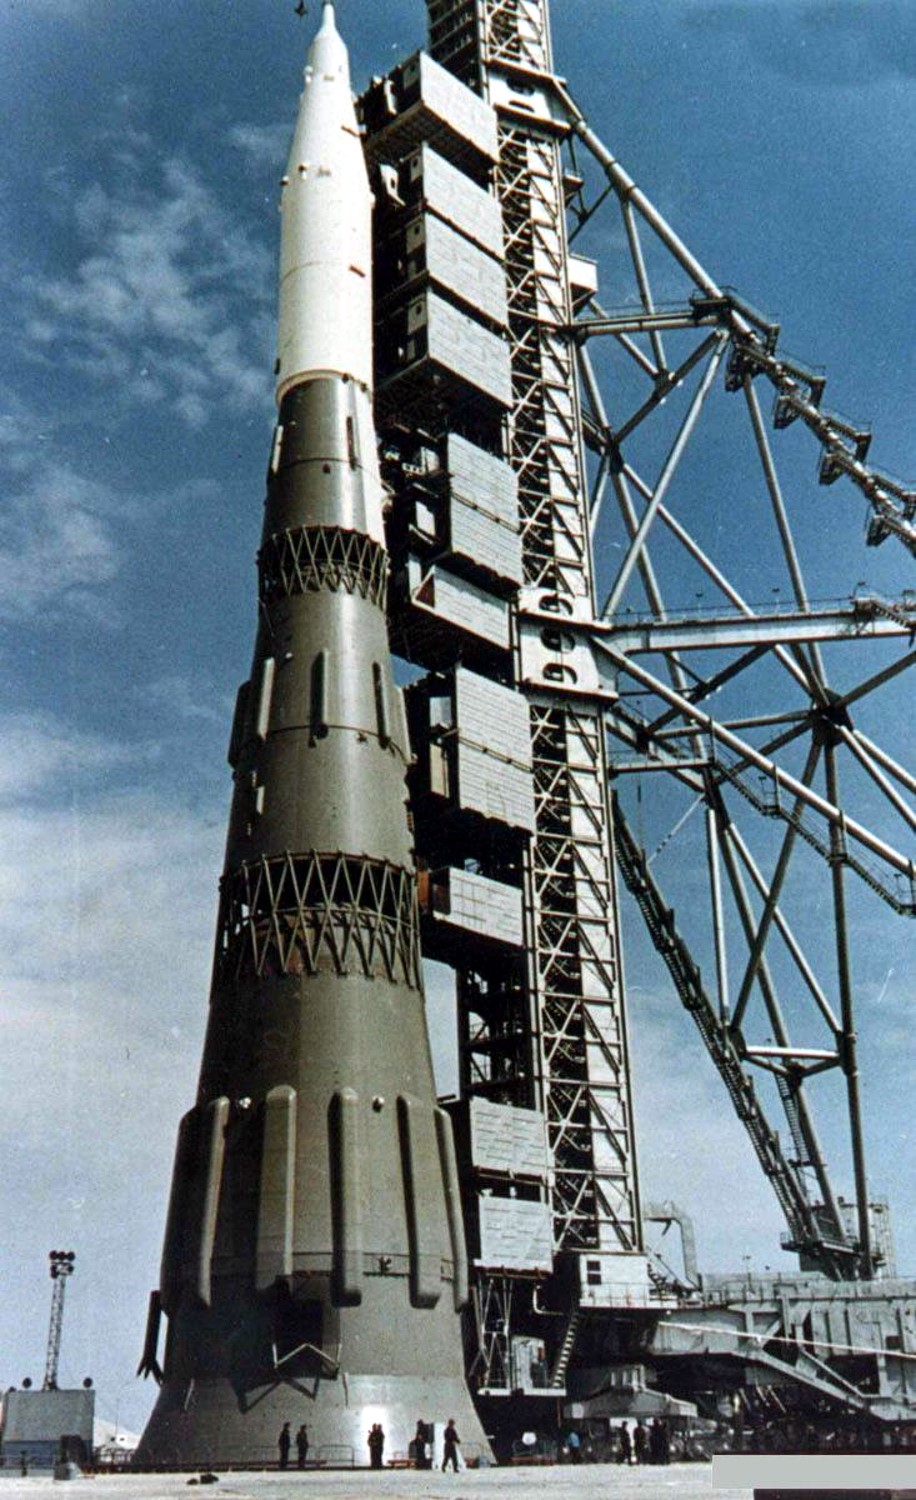 N1 1M1 mockup on the launch pad at the Baikonur Cosmodrome in late 1967